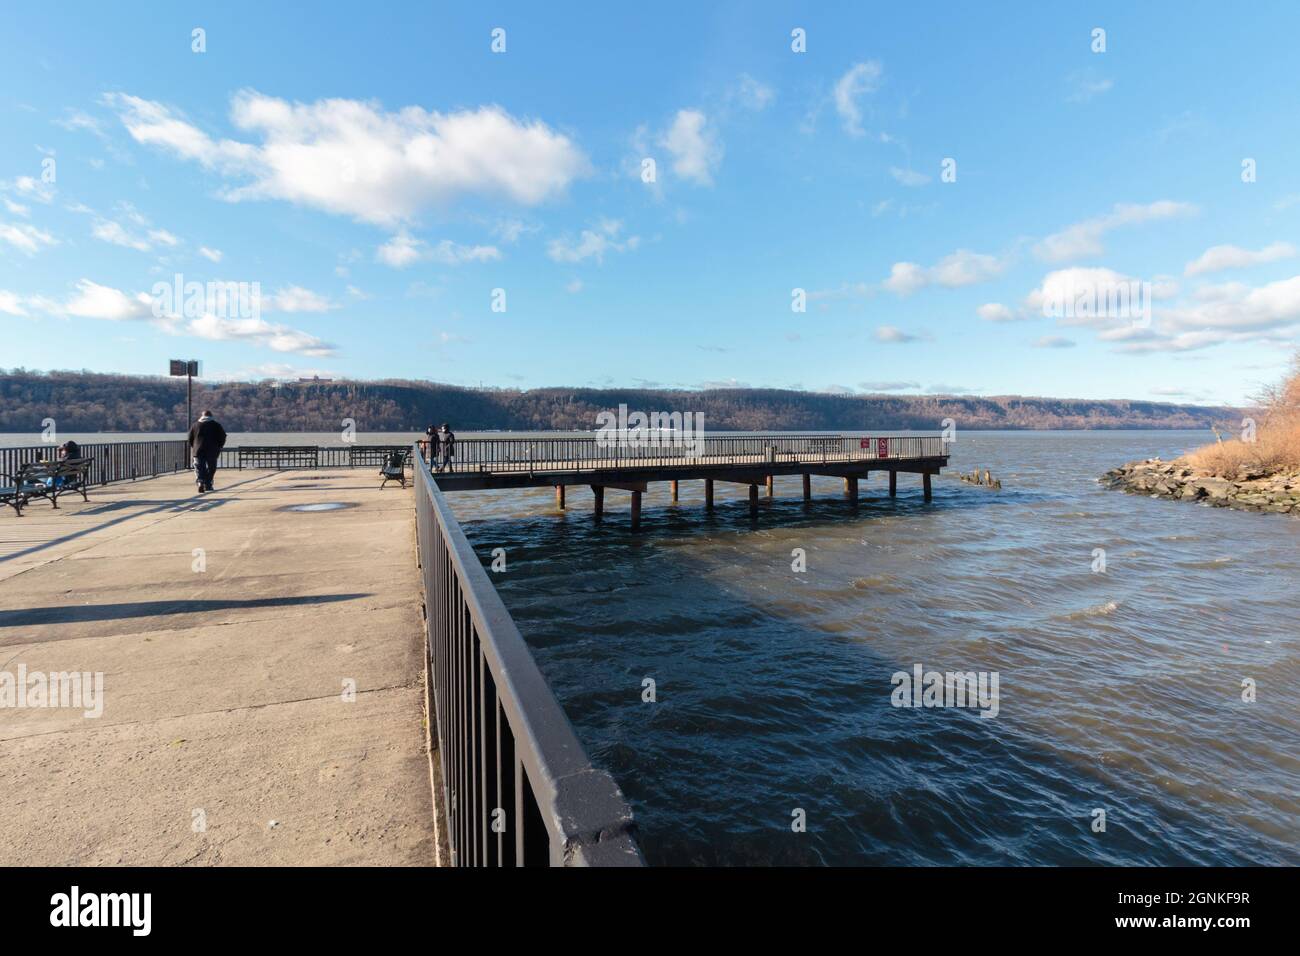 the Dyckman Pier on the Manhattan side of the Hudson River on a cold, windy day with a few people walking around Stock Photo